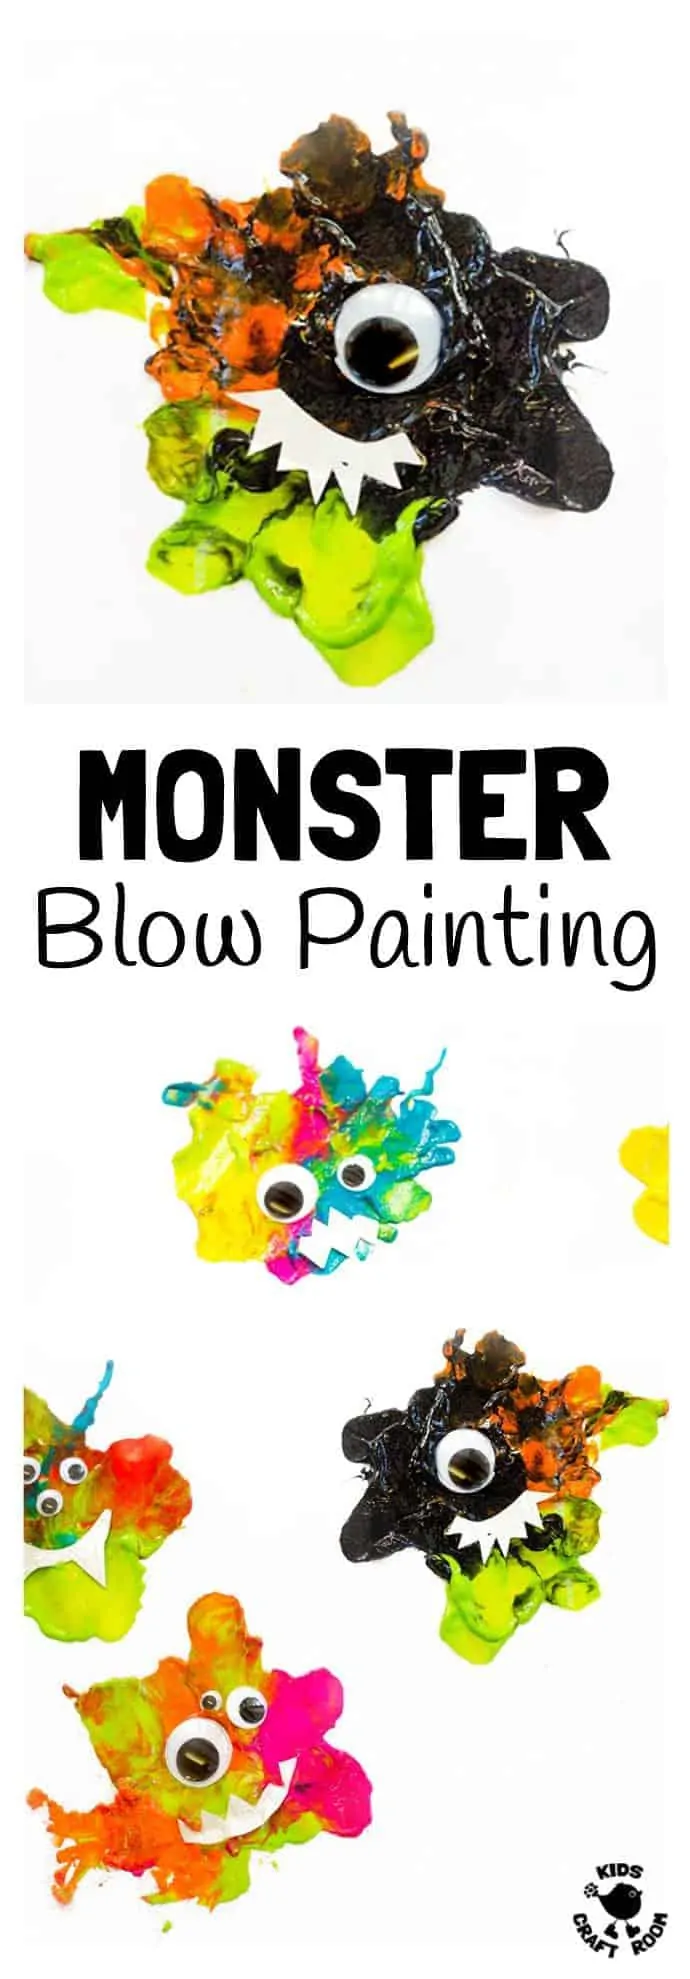 A selection of blow painted monsters in different shapes and colours.